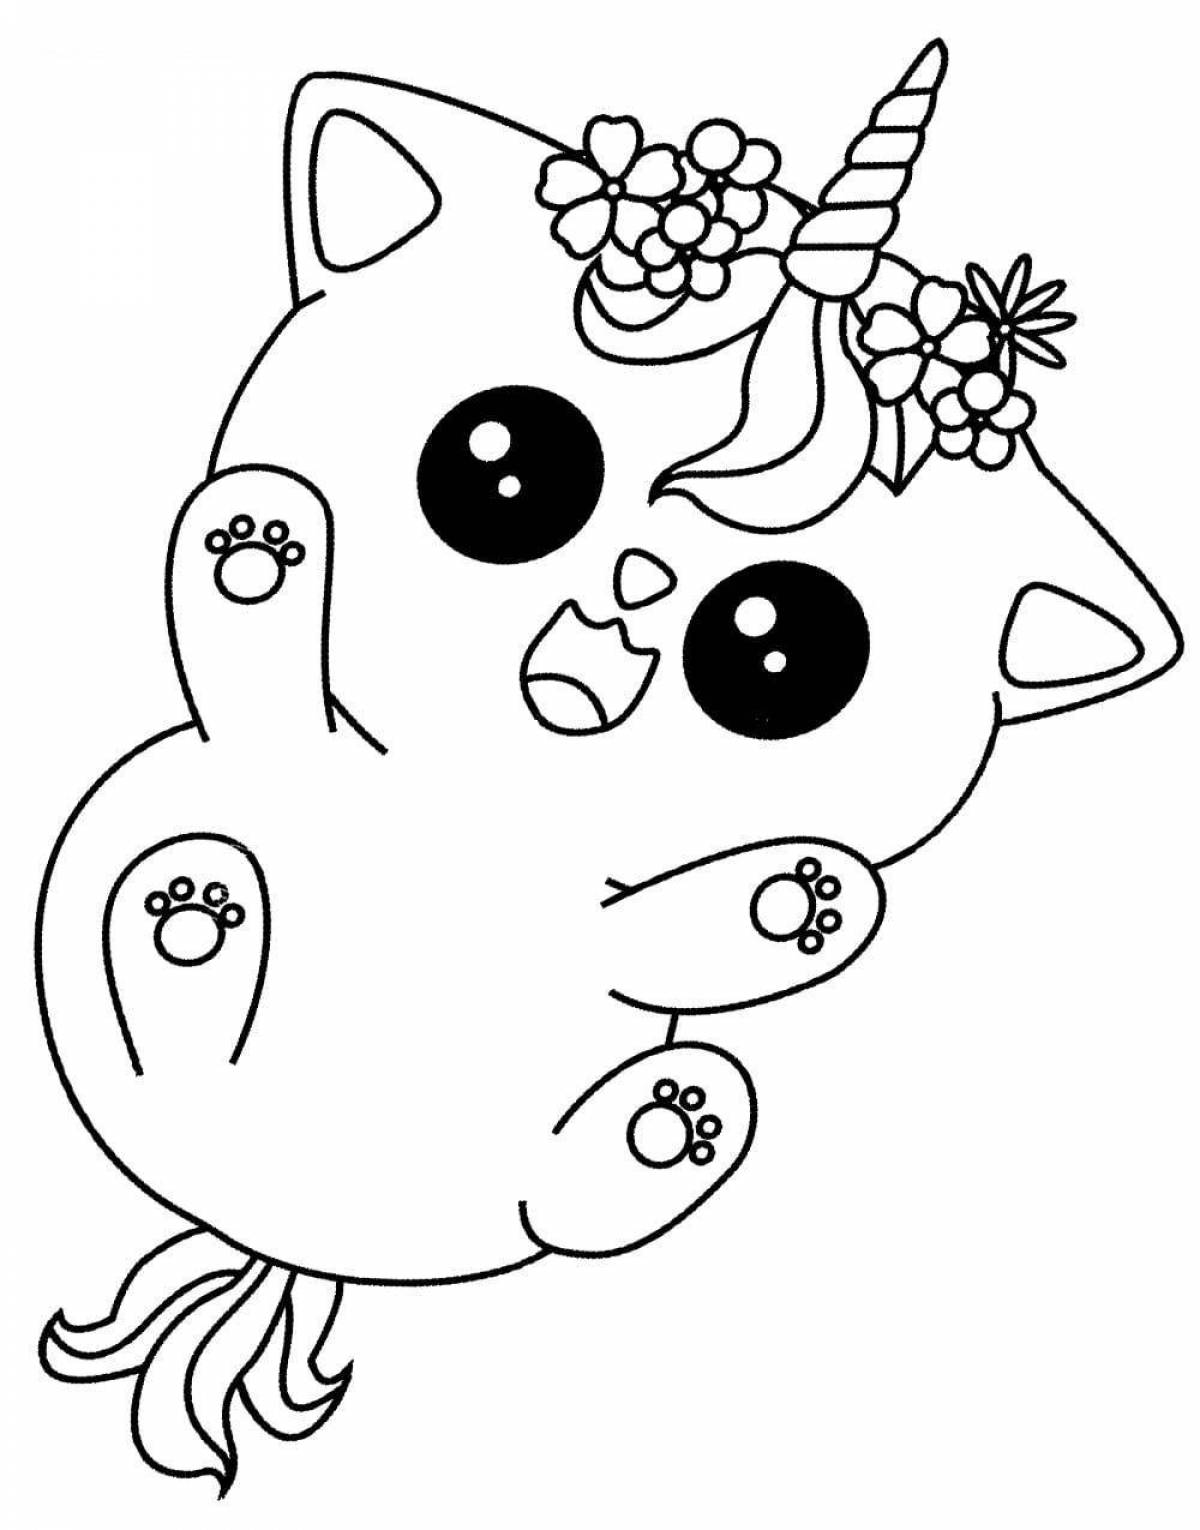 Fancy rainbow cat coloring page